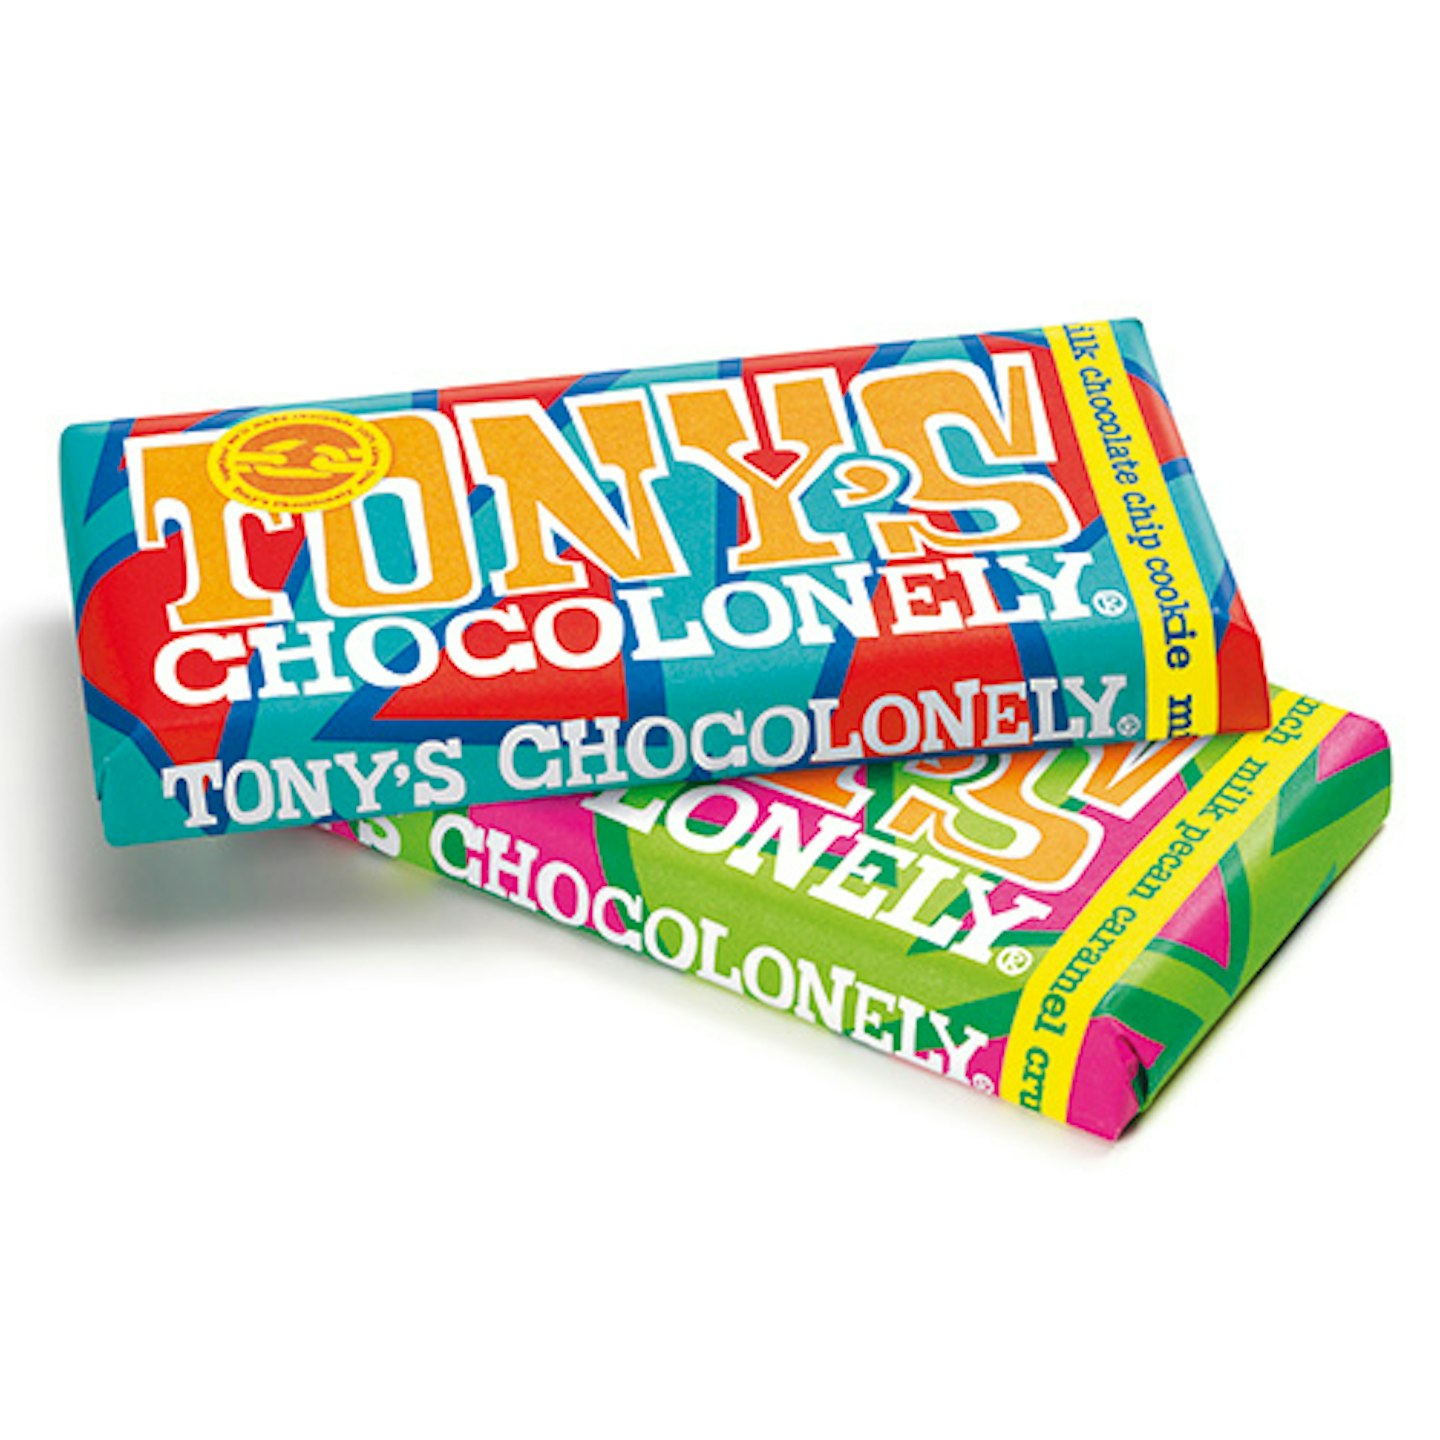 Two bars Tony's Chocolonely chocolate